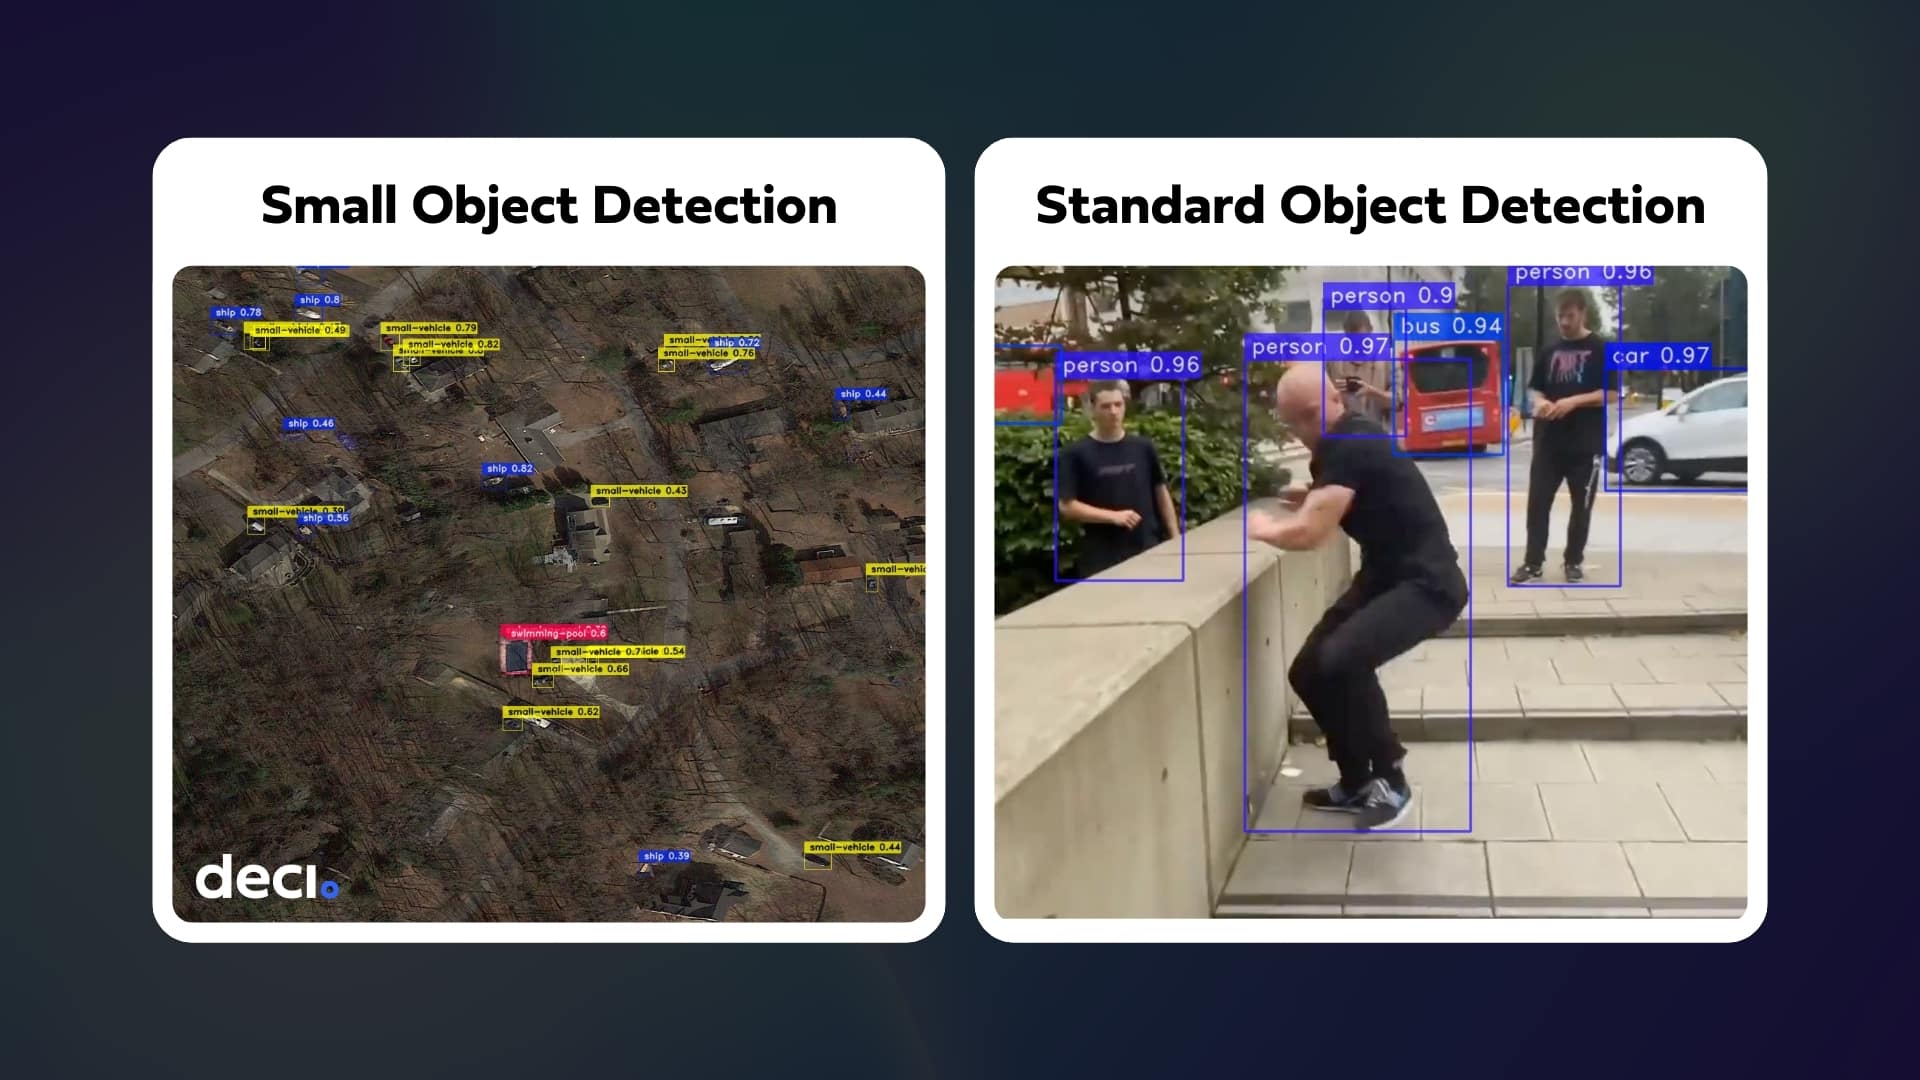 deci-small-object-detection-blog-featured